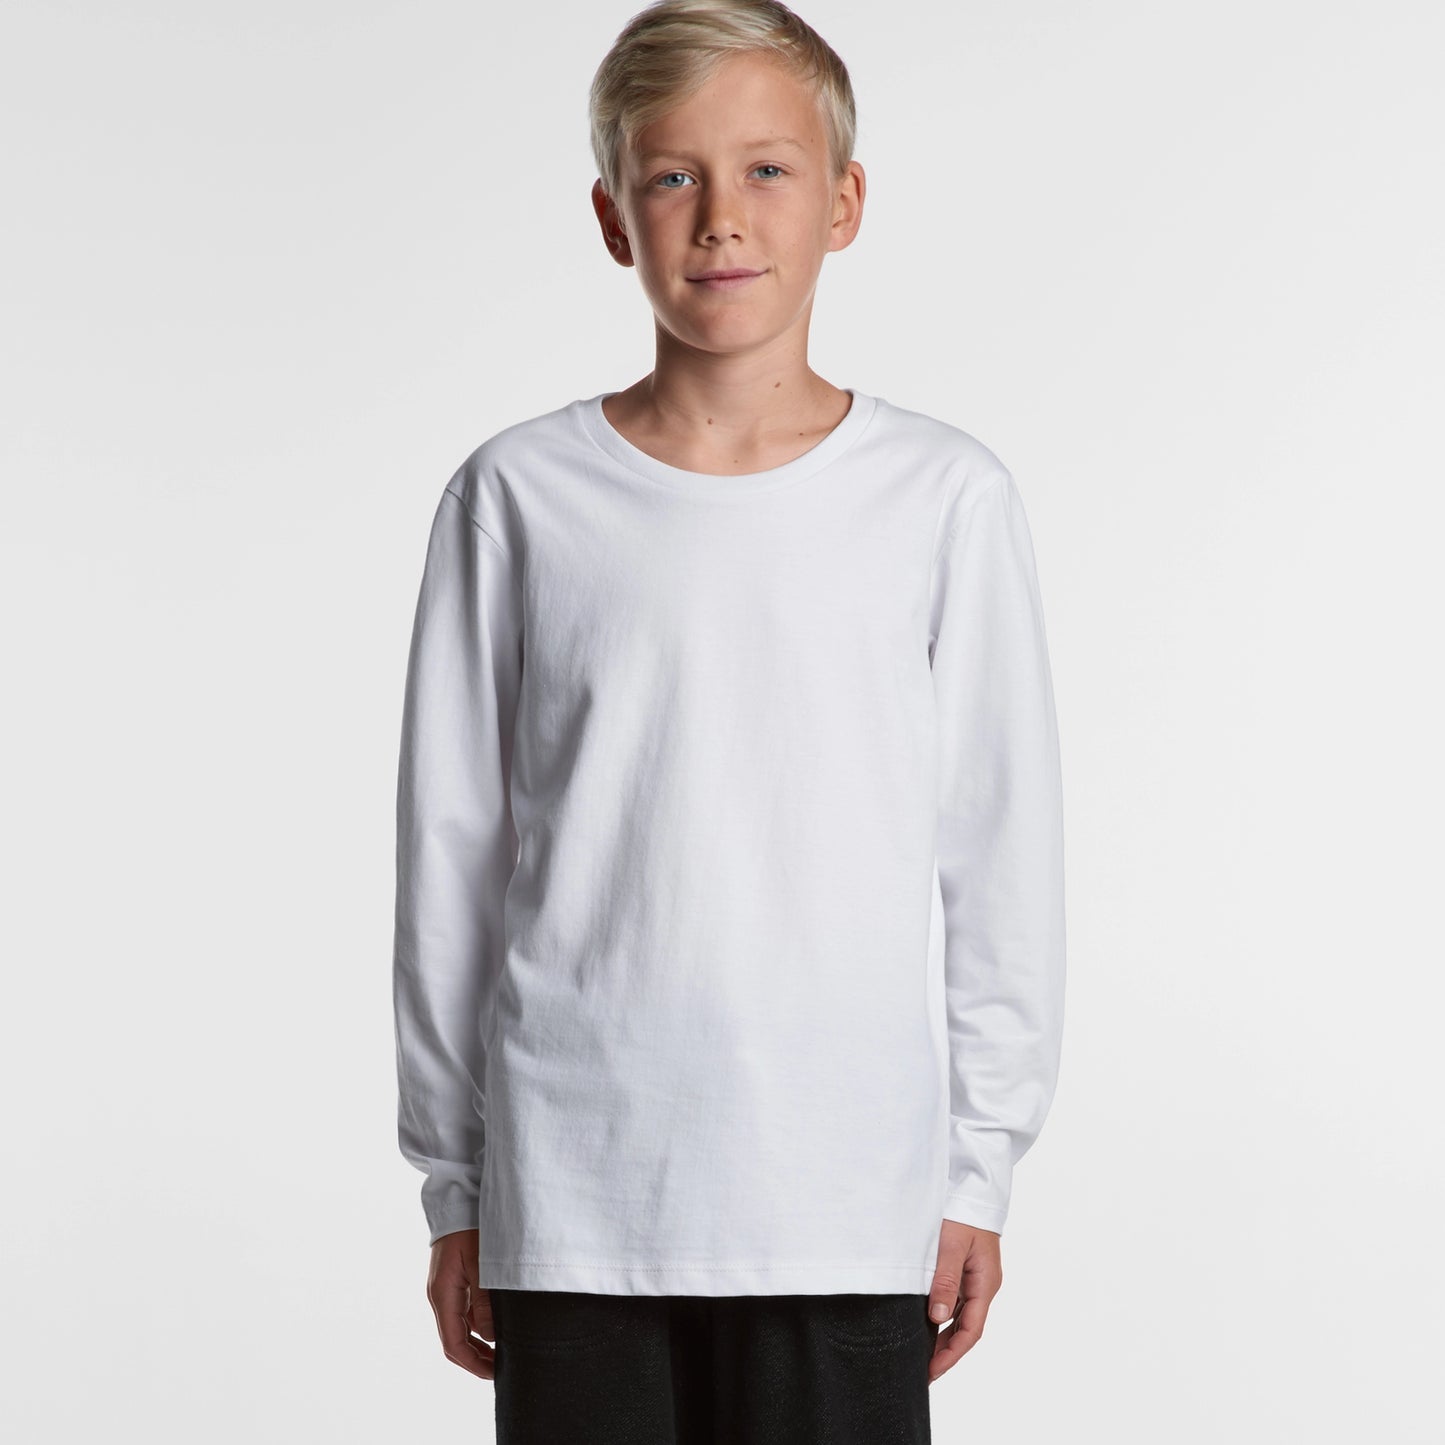 YOUTH STAPLE L/S TEE - 3008